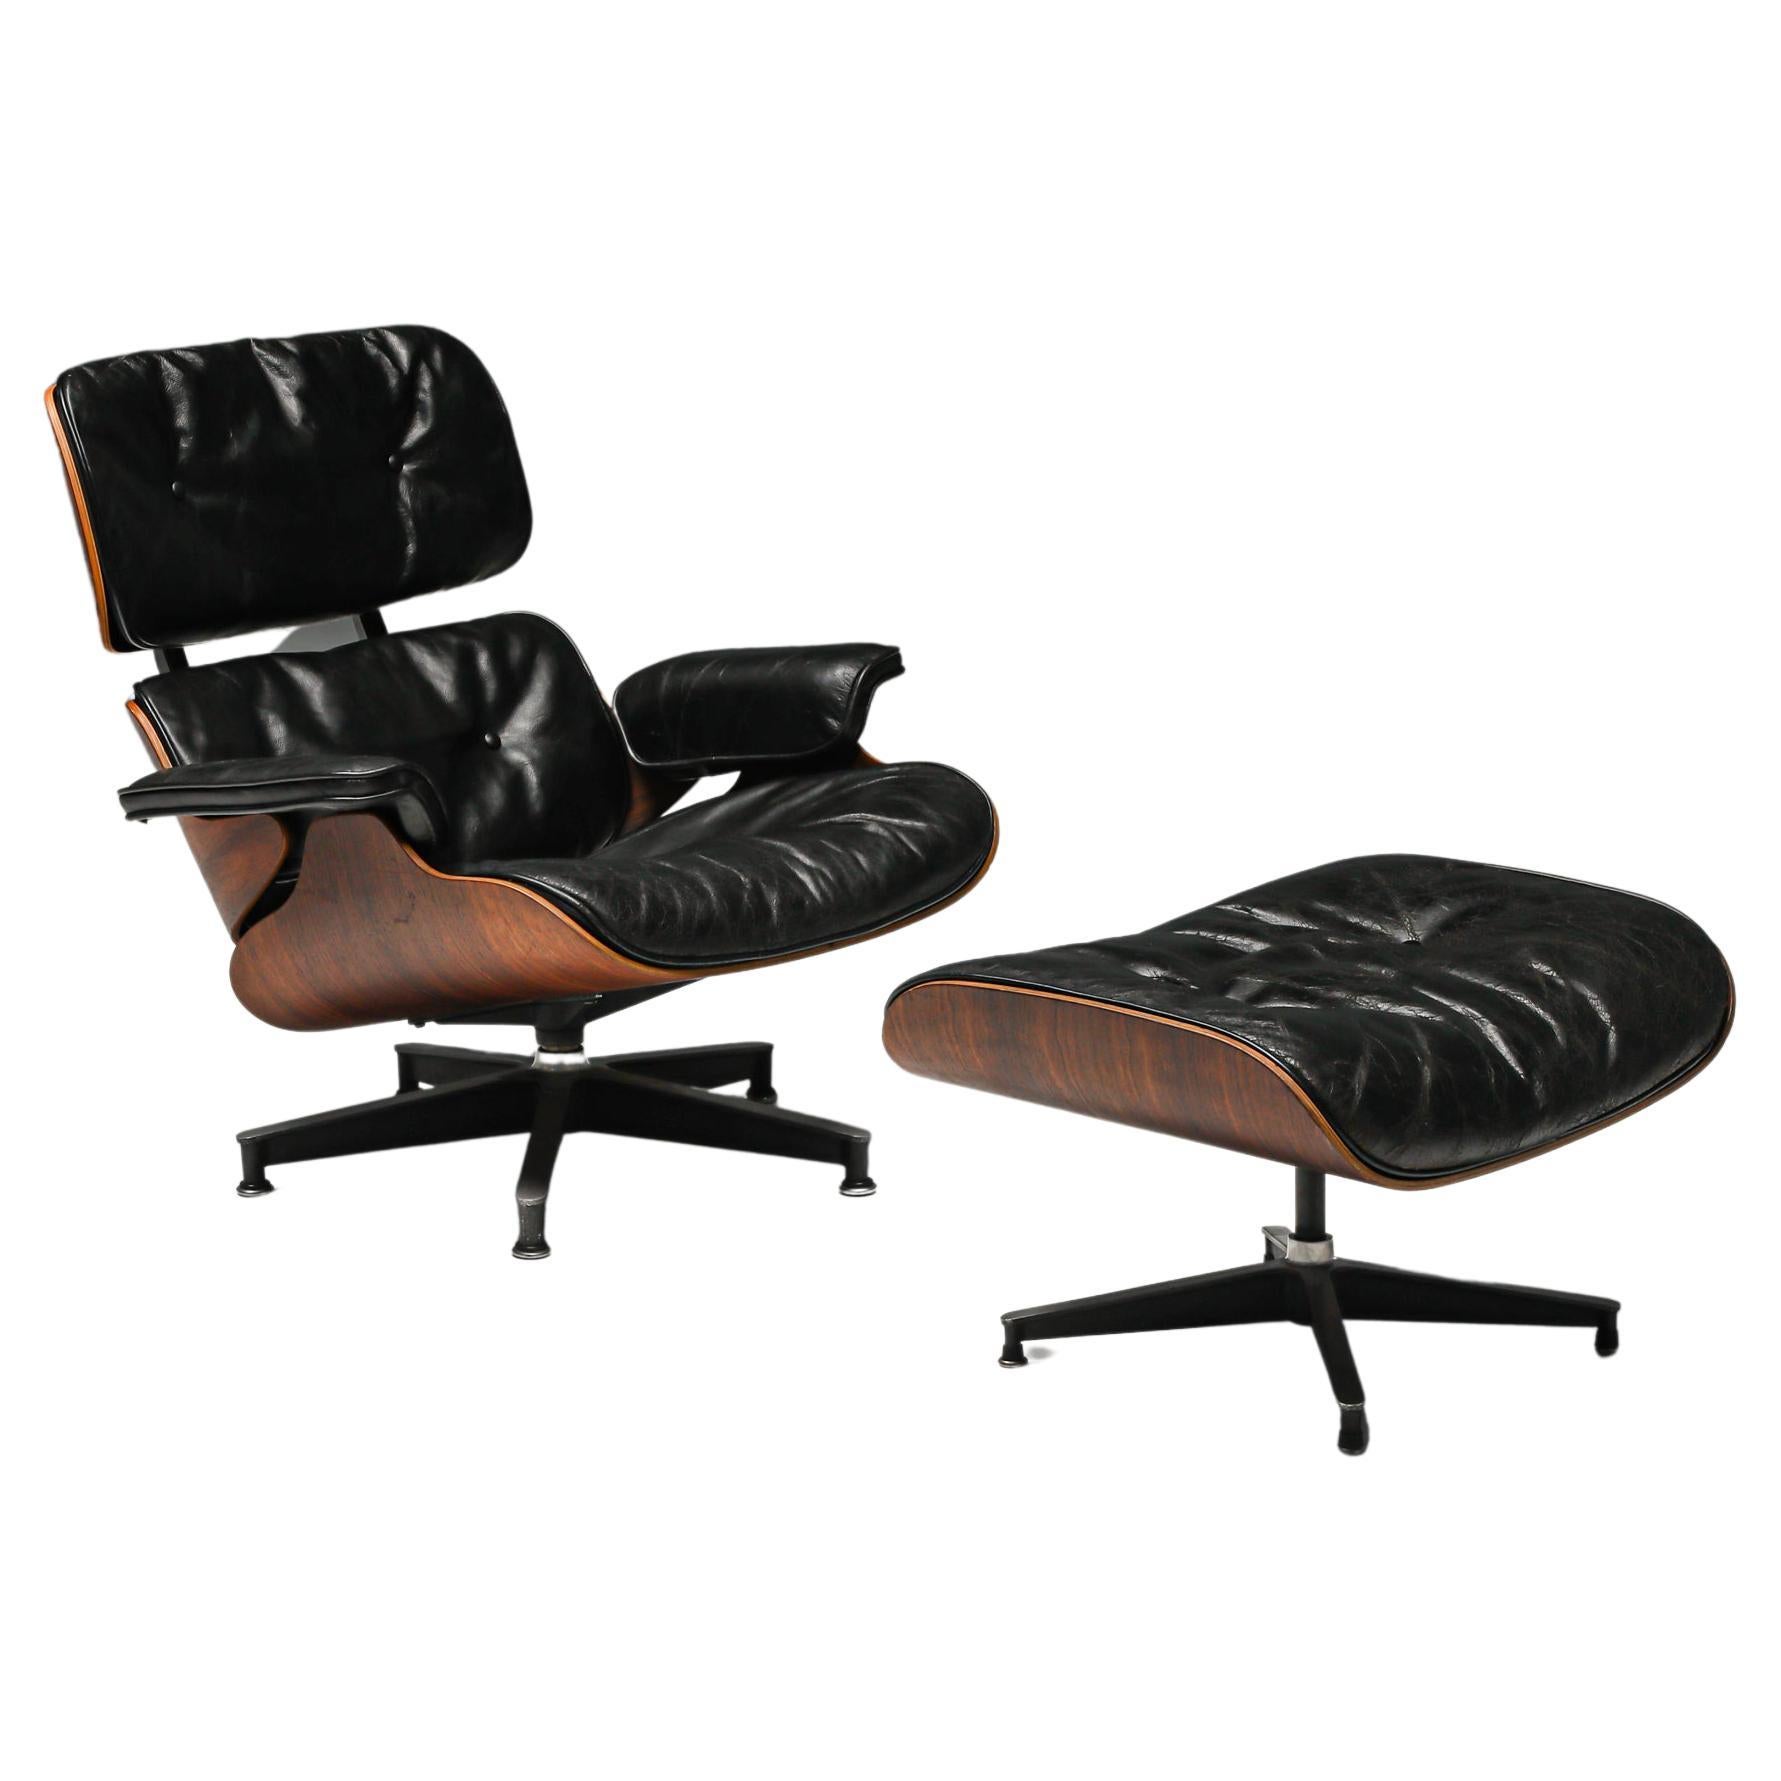 Eames Lounge Chair with Ottoman for Herman Miller, 1st Edition 57-59, Iconic